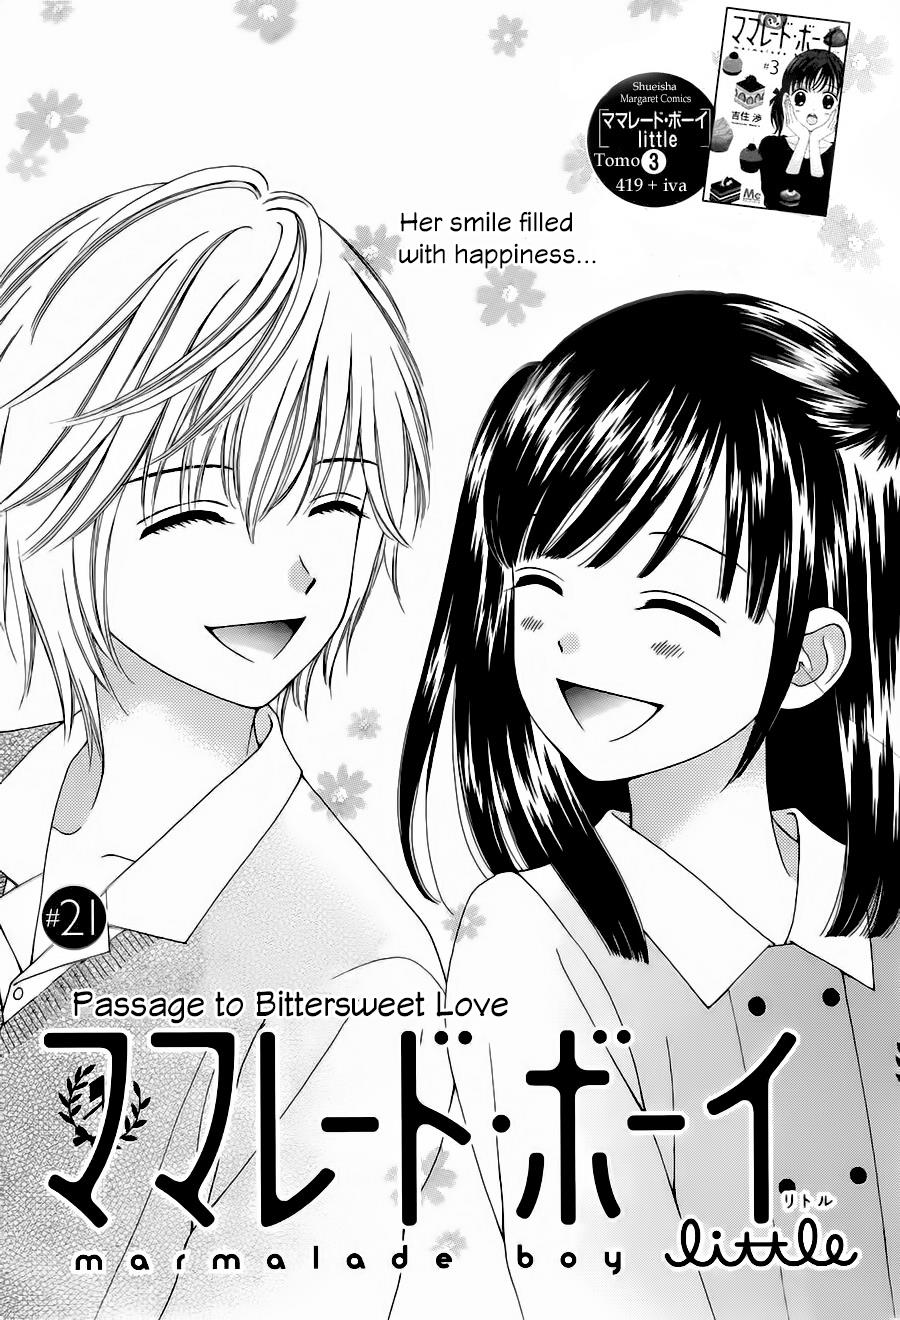 Marmalade Boy Little Vol.4 Chapter 21: Passage To Bittersweet Love - Picture 1